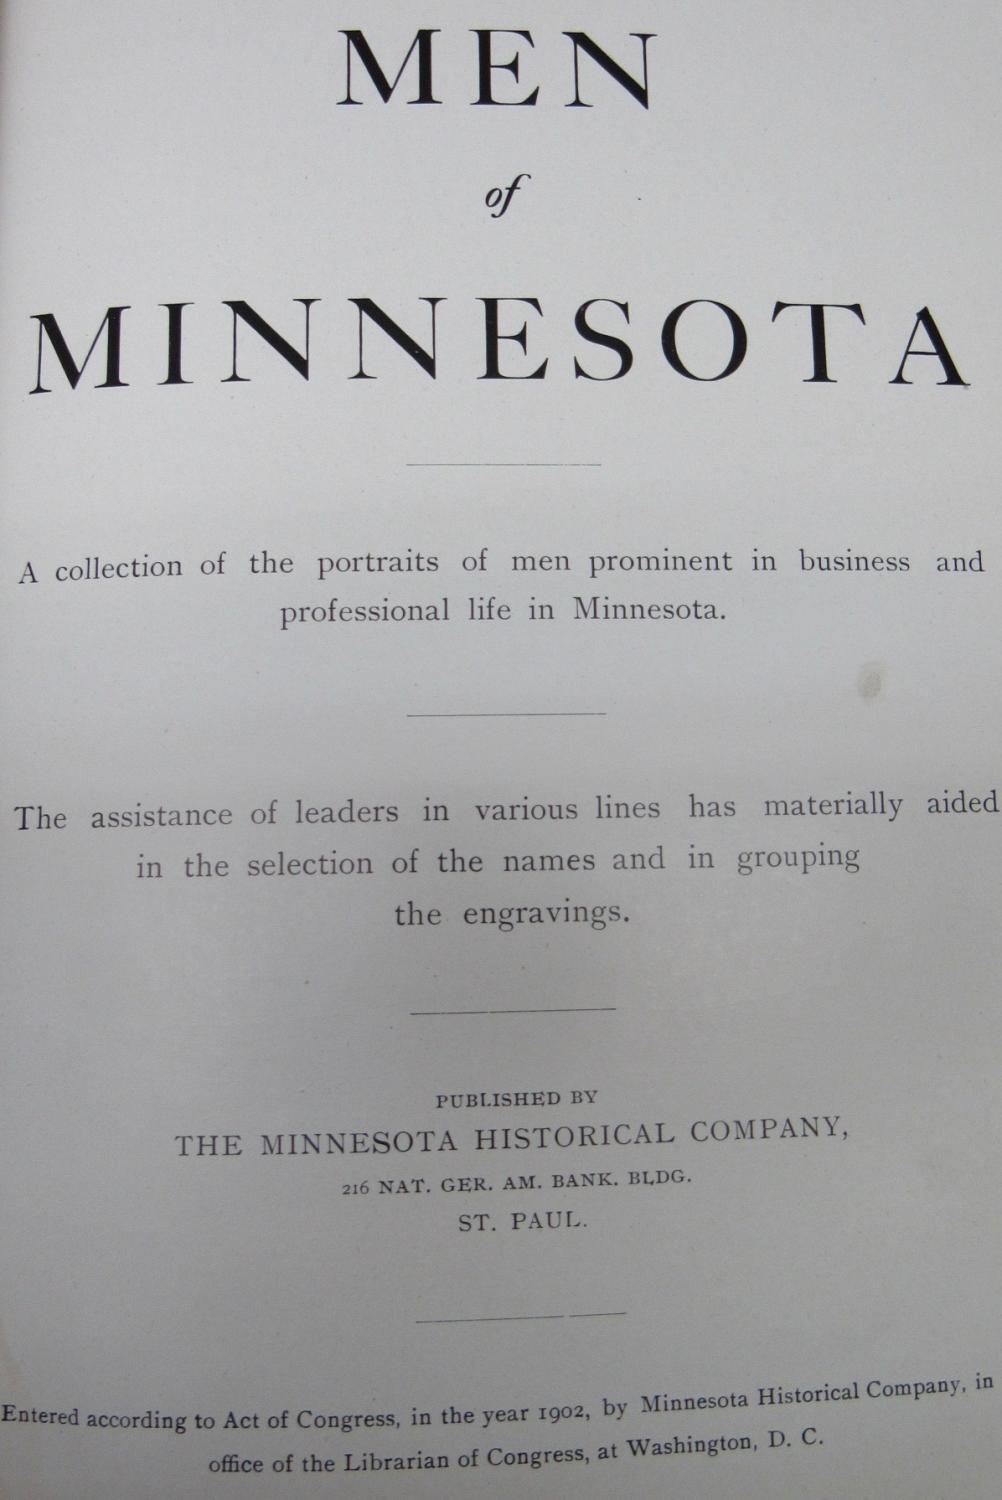 Men of Minnesota: a collection of the portraits of men prominent